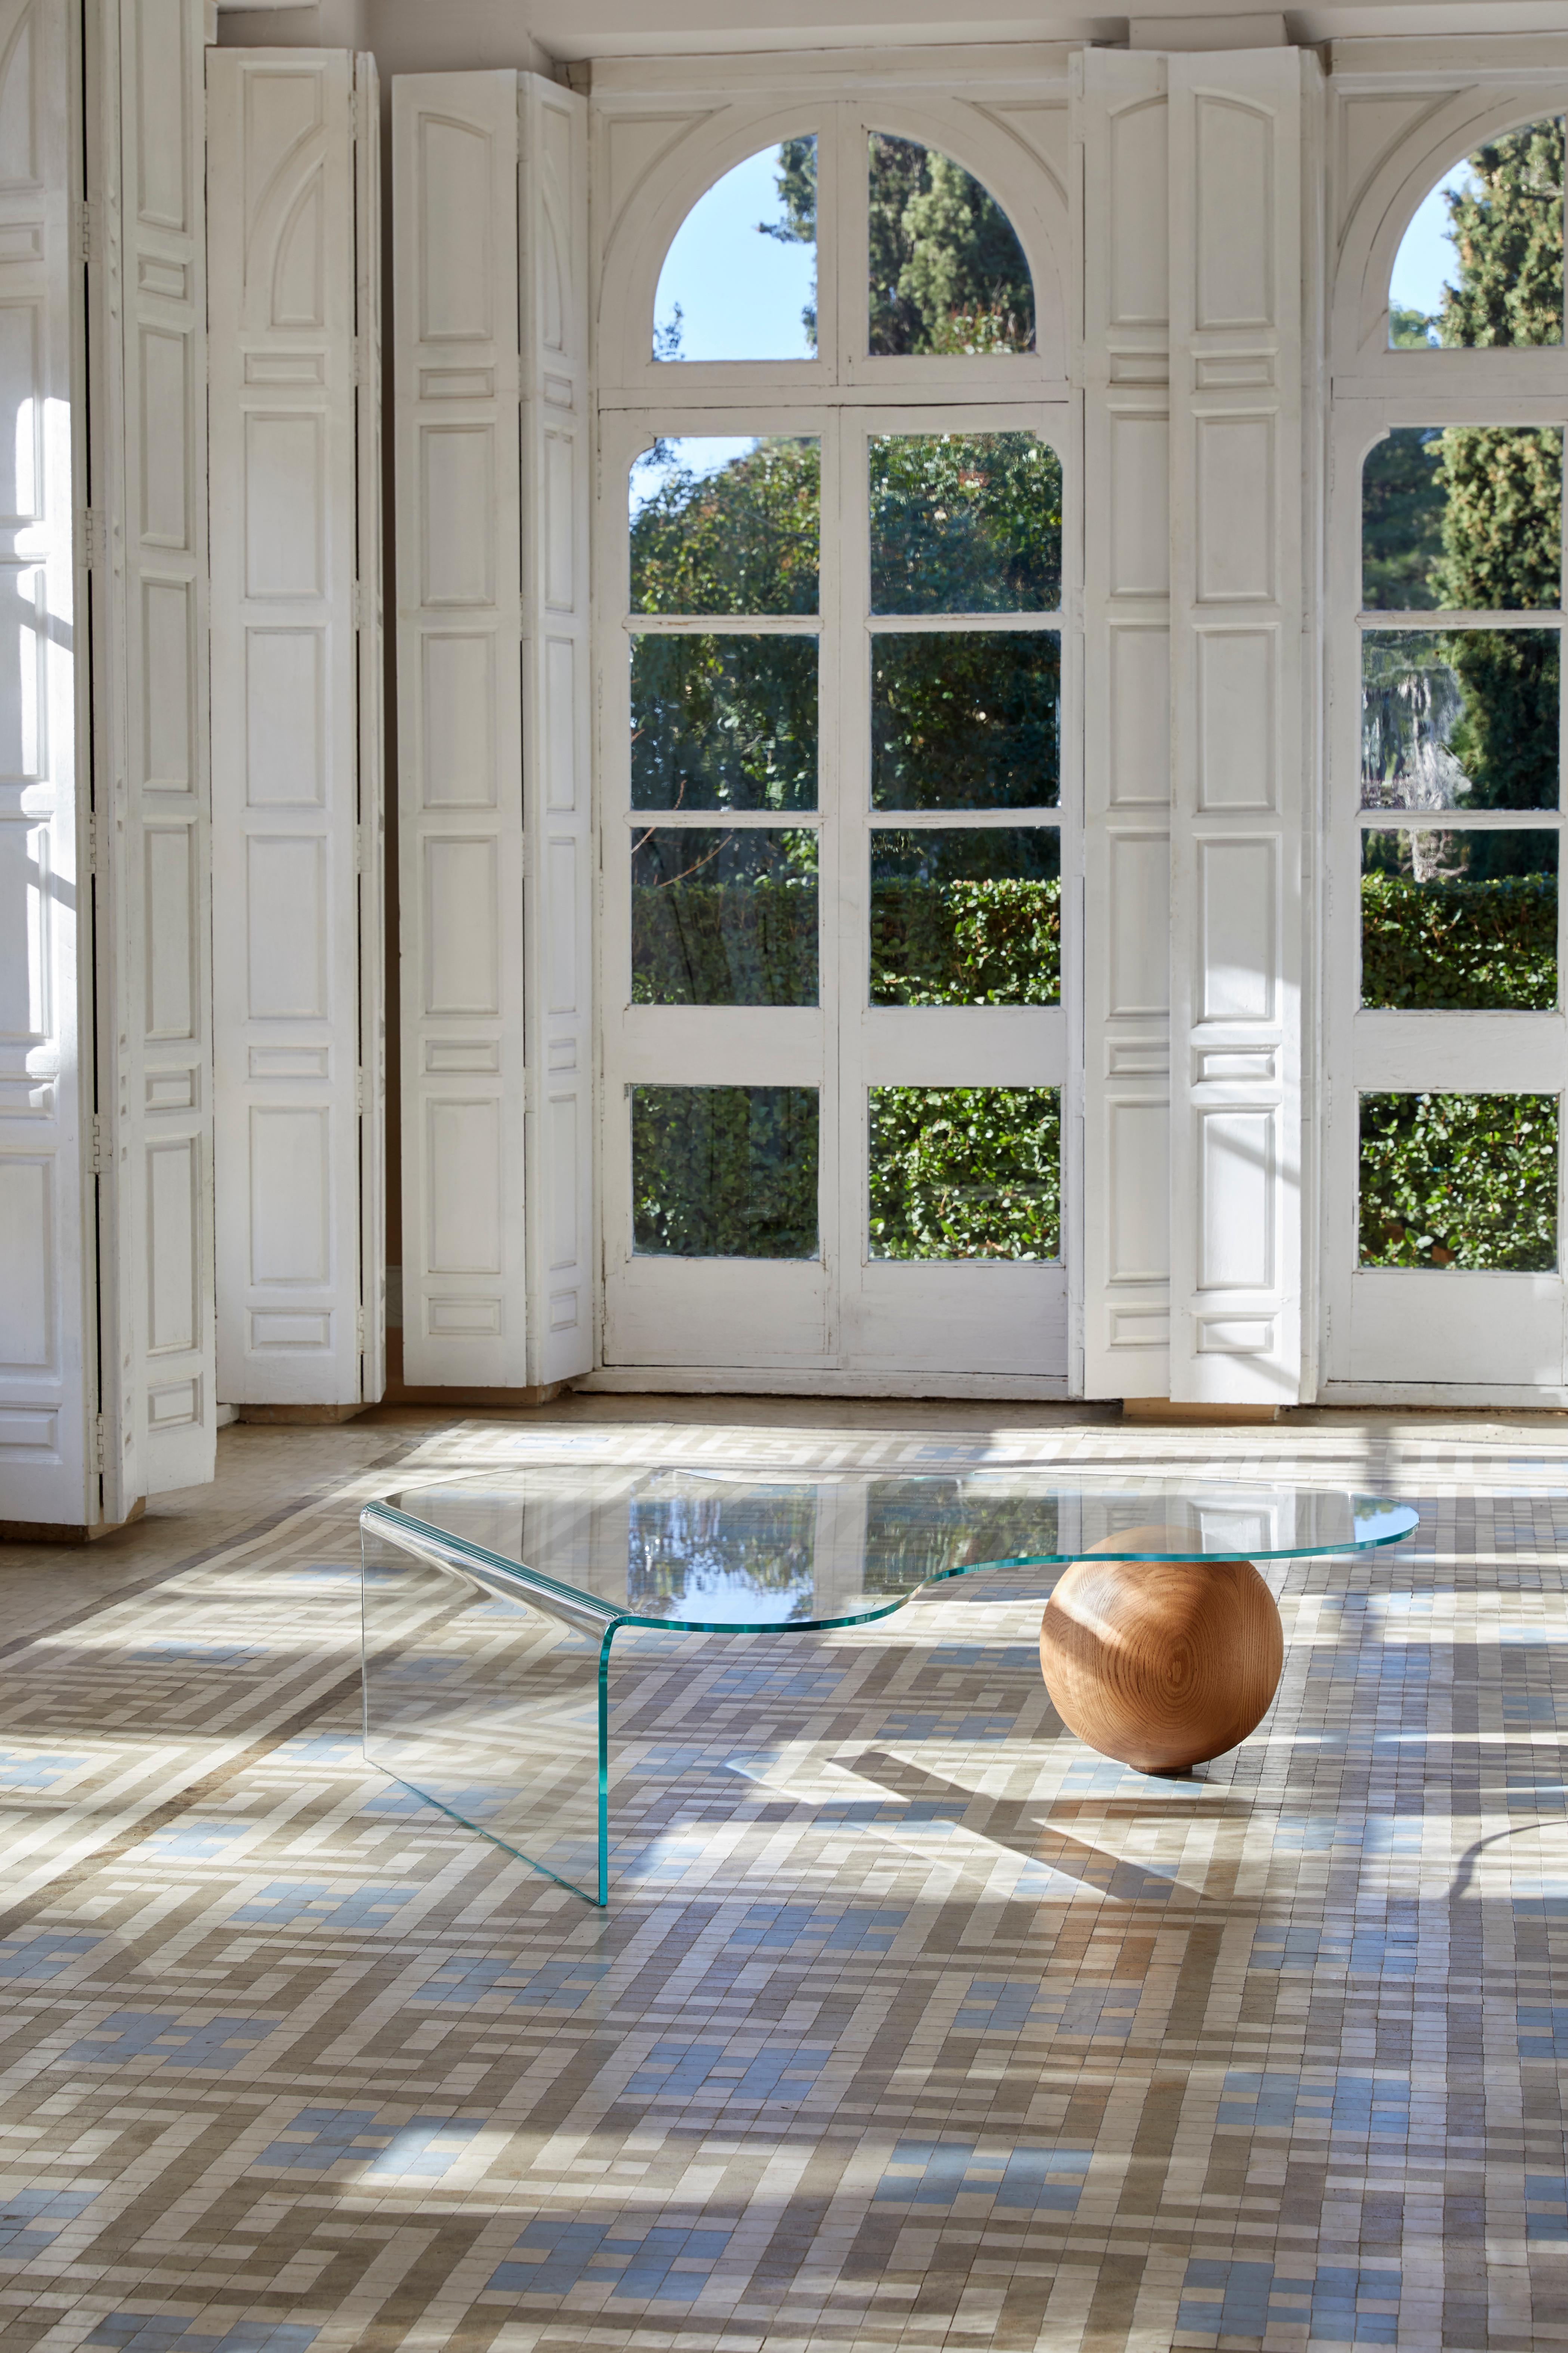 Organic, whimsical, elegant. A seamless marriage of glass and wood, the GlobeWoo intertwines undulating form with a contemporary minimalist sensibility, resulting in a unique table equally suited for a weekend coffee or displaying your current